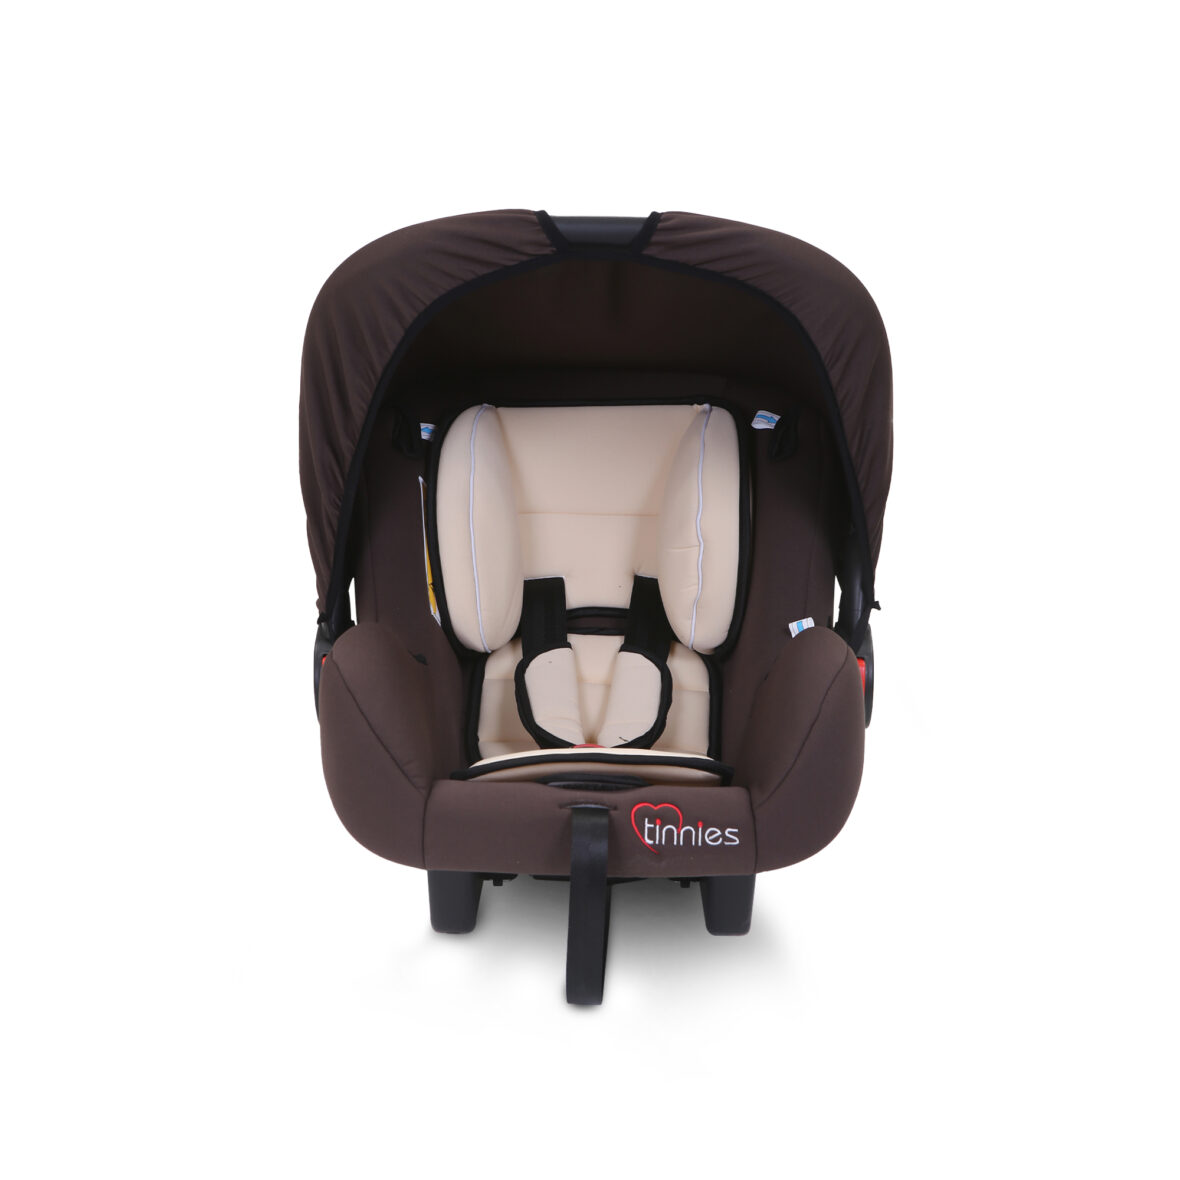 Tinnies Baby Carry Cot (Brown) T001.2